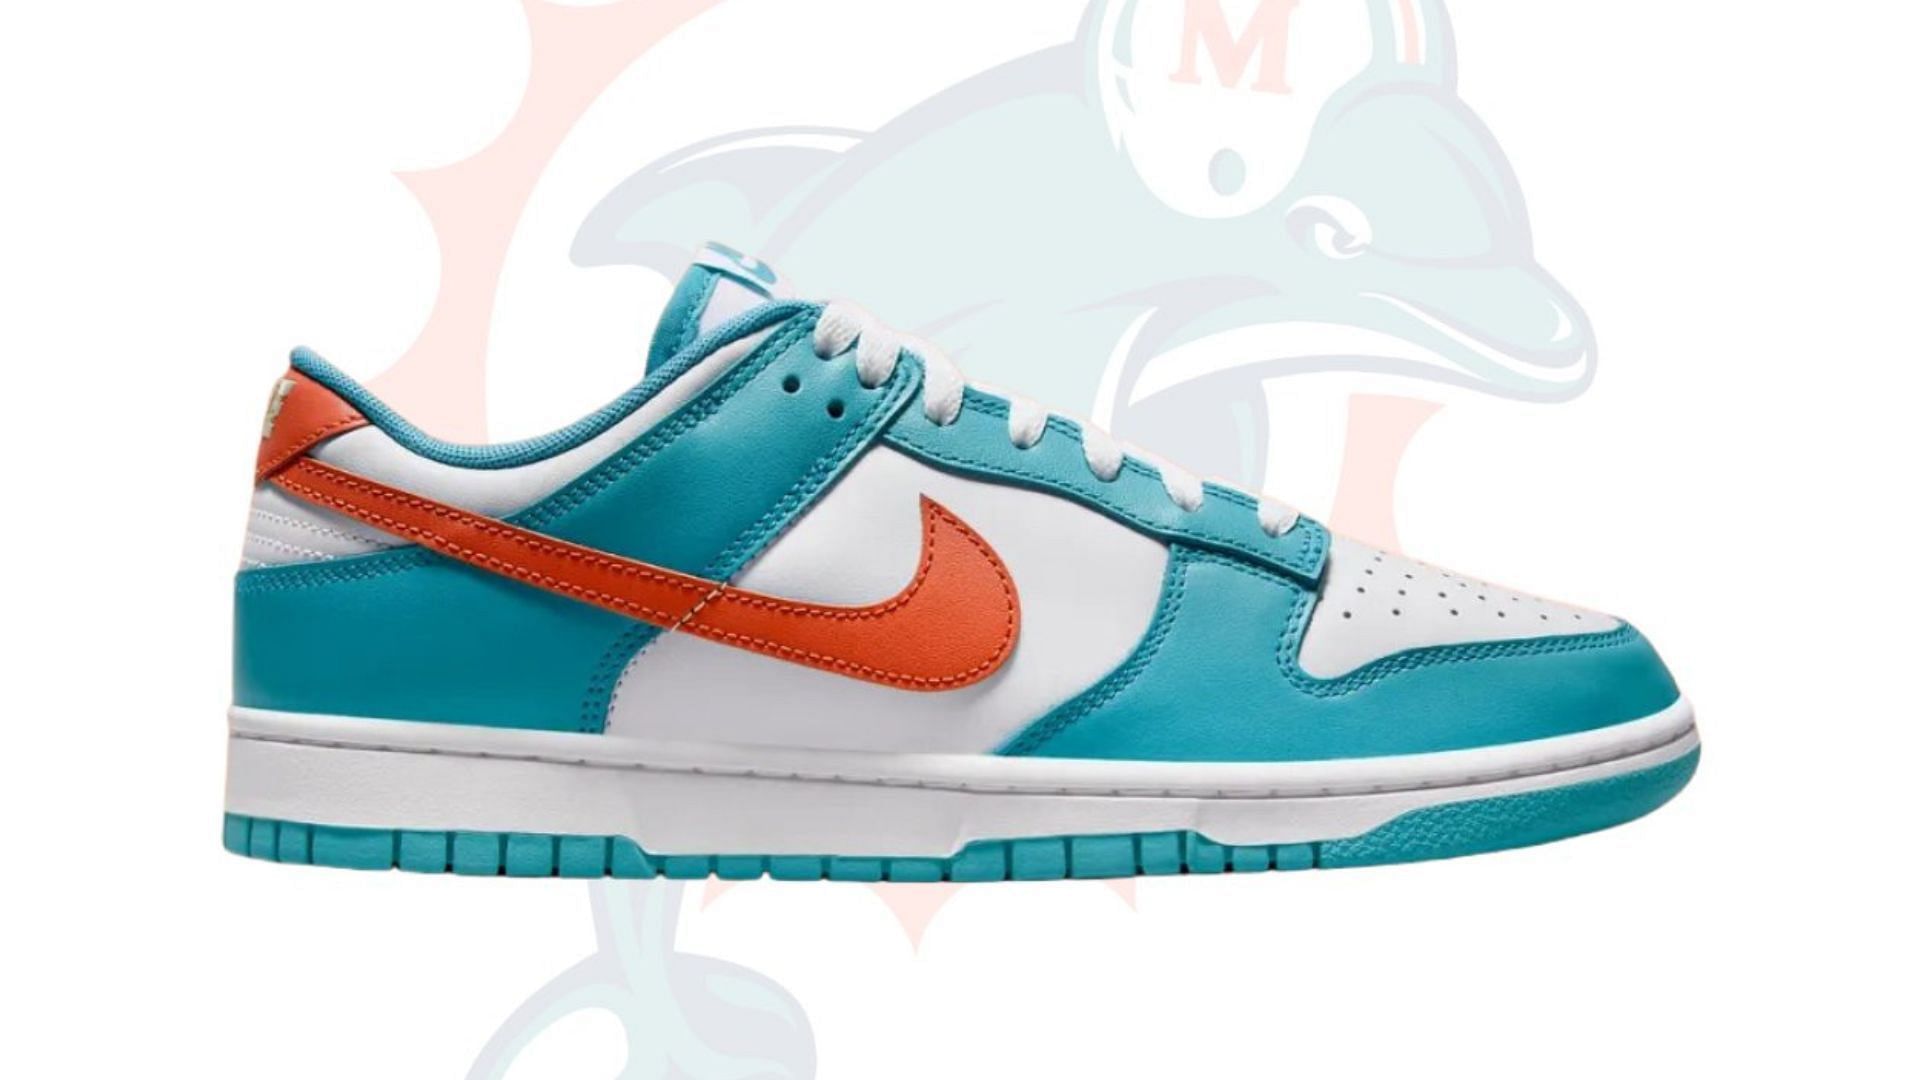 Miami Dolphins LV Luxury Low Top Skate Sneakers Shoes